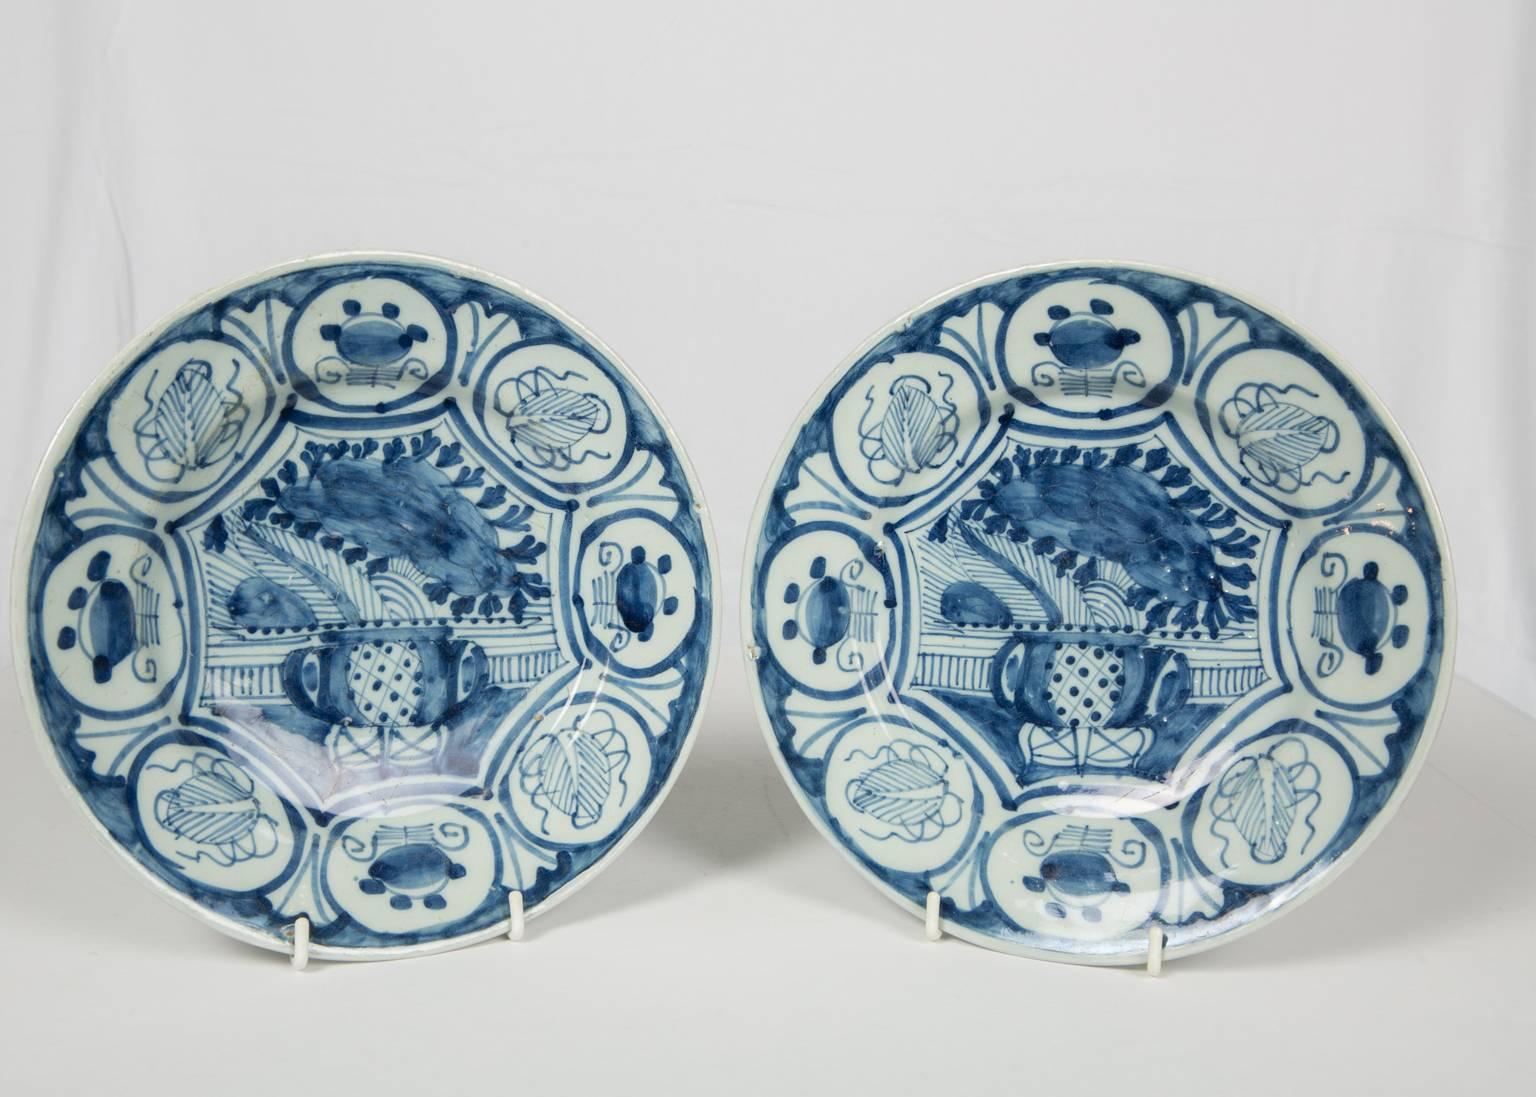 We are pleased to offer this pair of blue and white Dutch Delft dishes with lovely chinoiserie decoration, which features an image of a vase overflowing with flowers. 
Around the vase and flowers is a wide border with symbols of good fortune in the